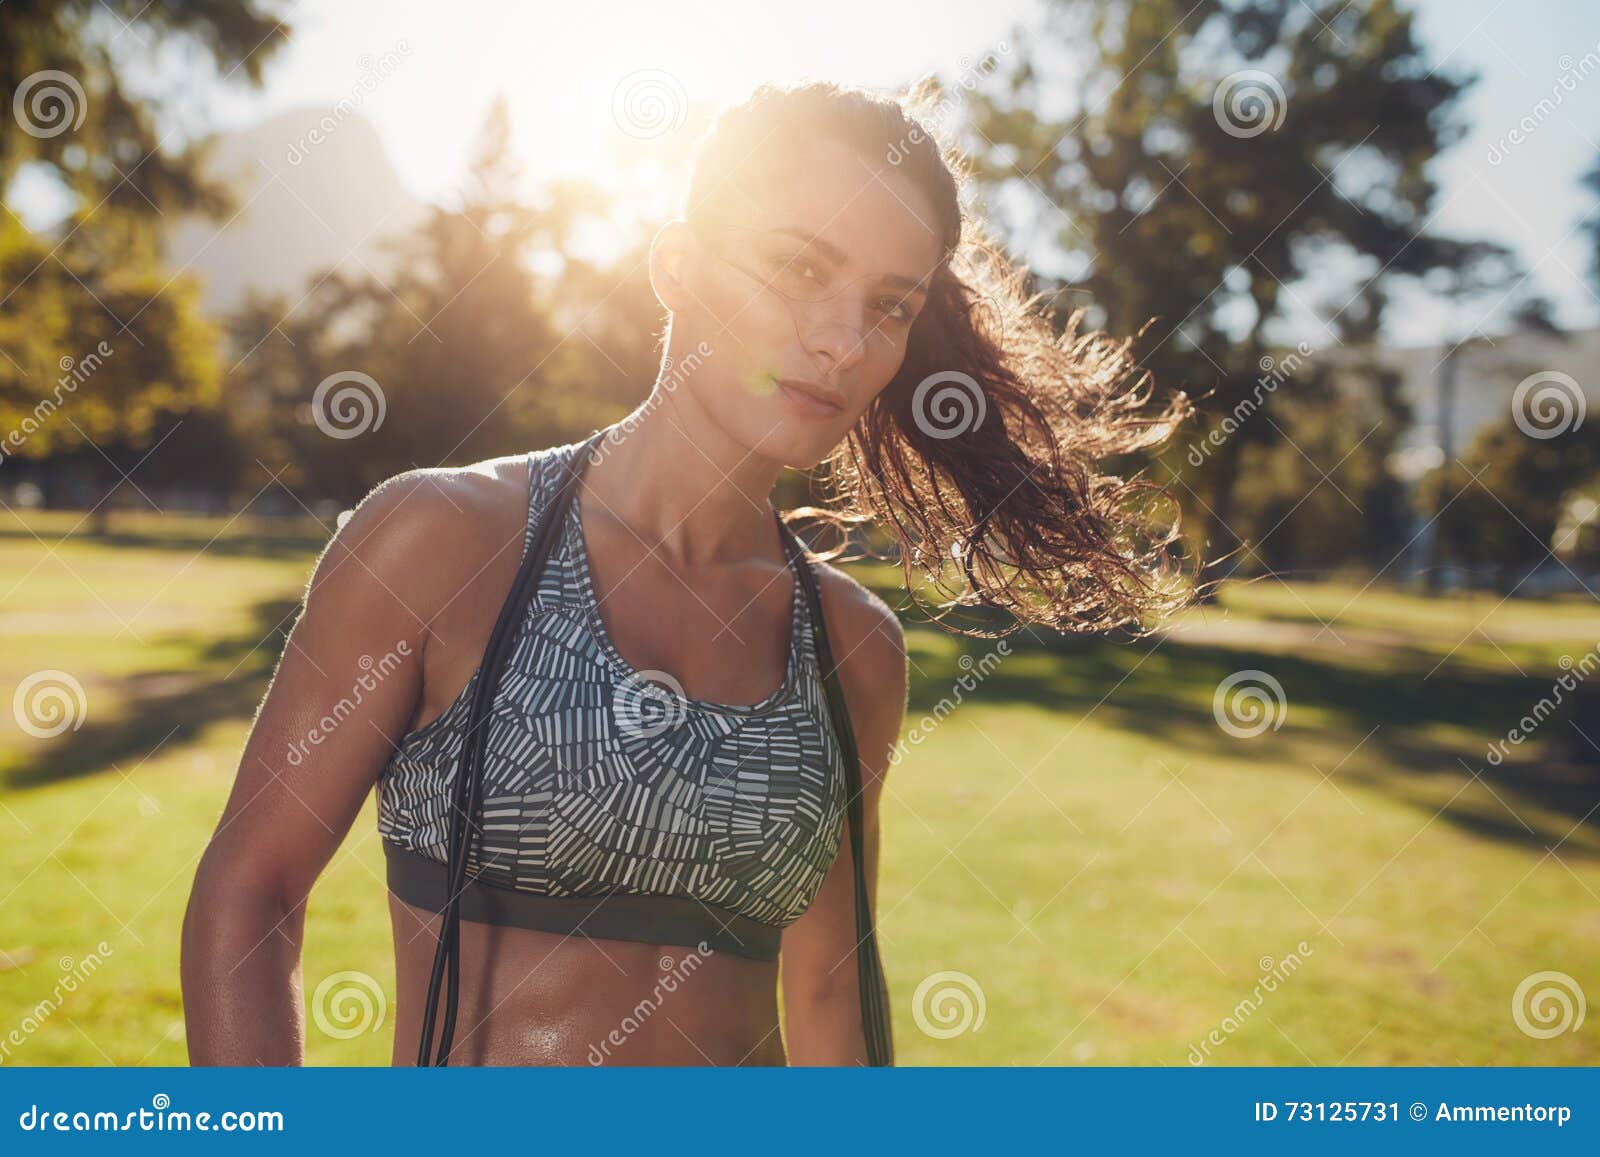 Healthy Young Woman at the Park with a Skipping Rope Stock Image - Image of  fitness, people: 73125731